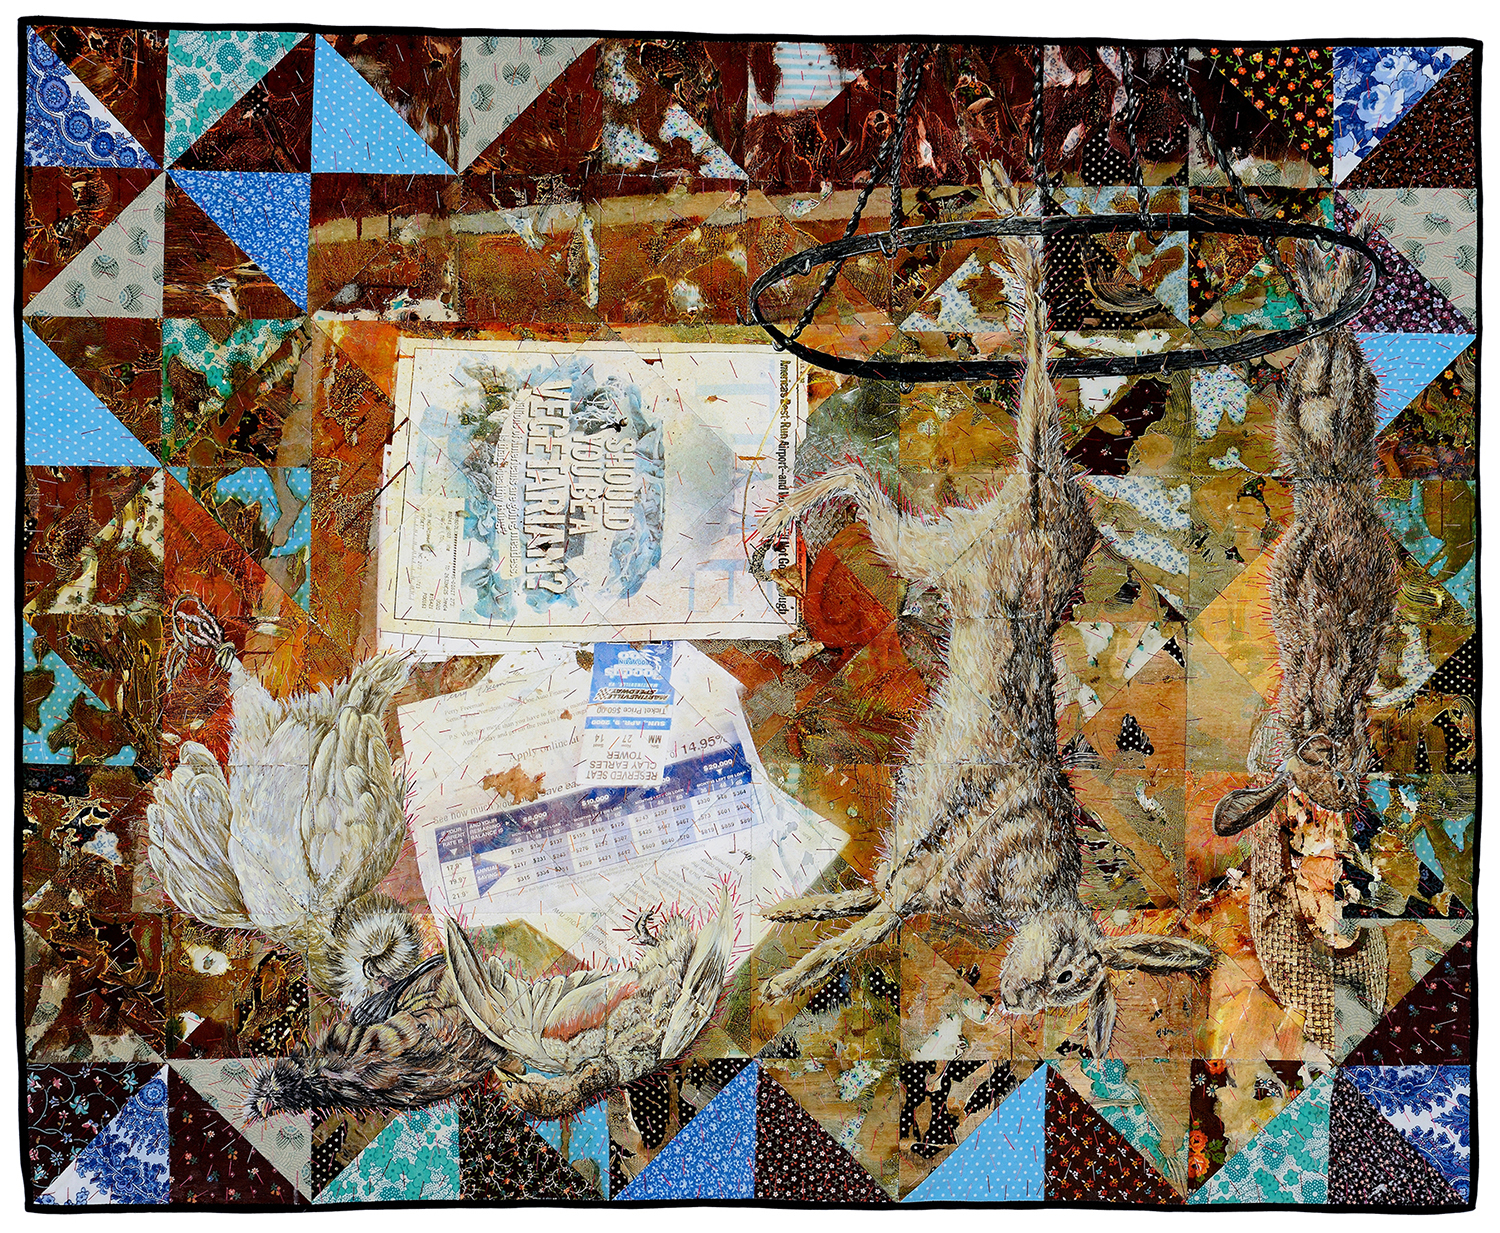 Jeana Eve Klein, Should You Be A Vegetarian? (After Utrecht), 2014. Mixed media quilt (Digital printing, acrylic paint and dye on recycled fabric; machine-pieced and hand-quilted), 28 x 34 in.